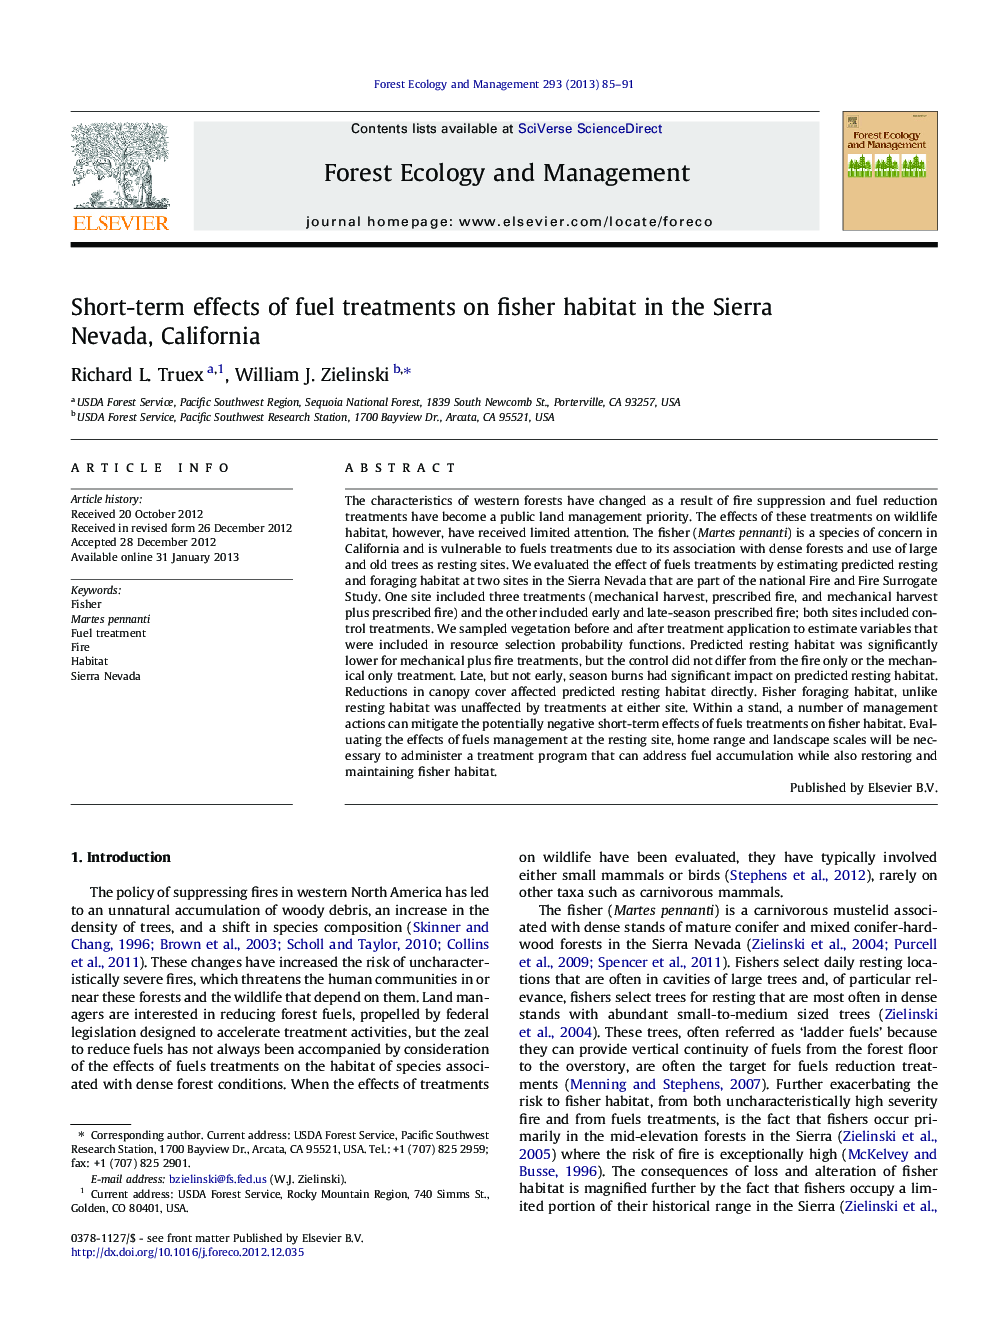 Short-term effects of fuel treatments on fisher habitat in the Sierra Nevada, California